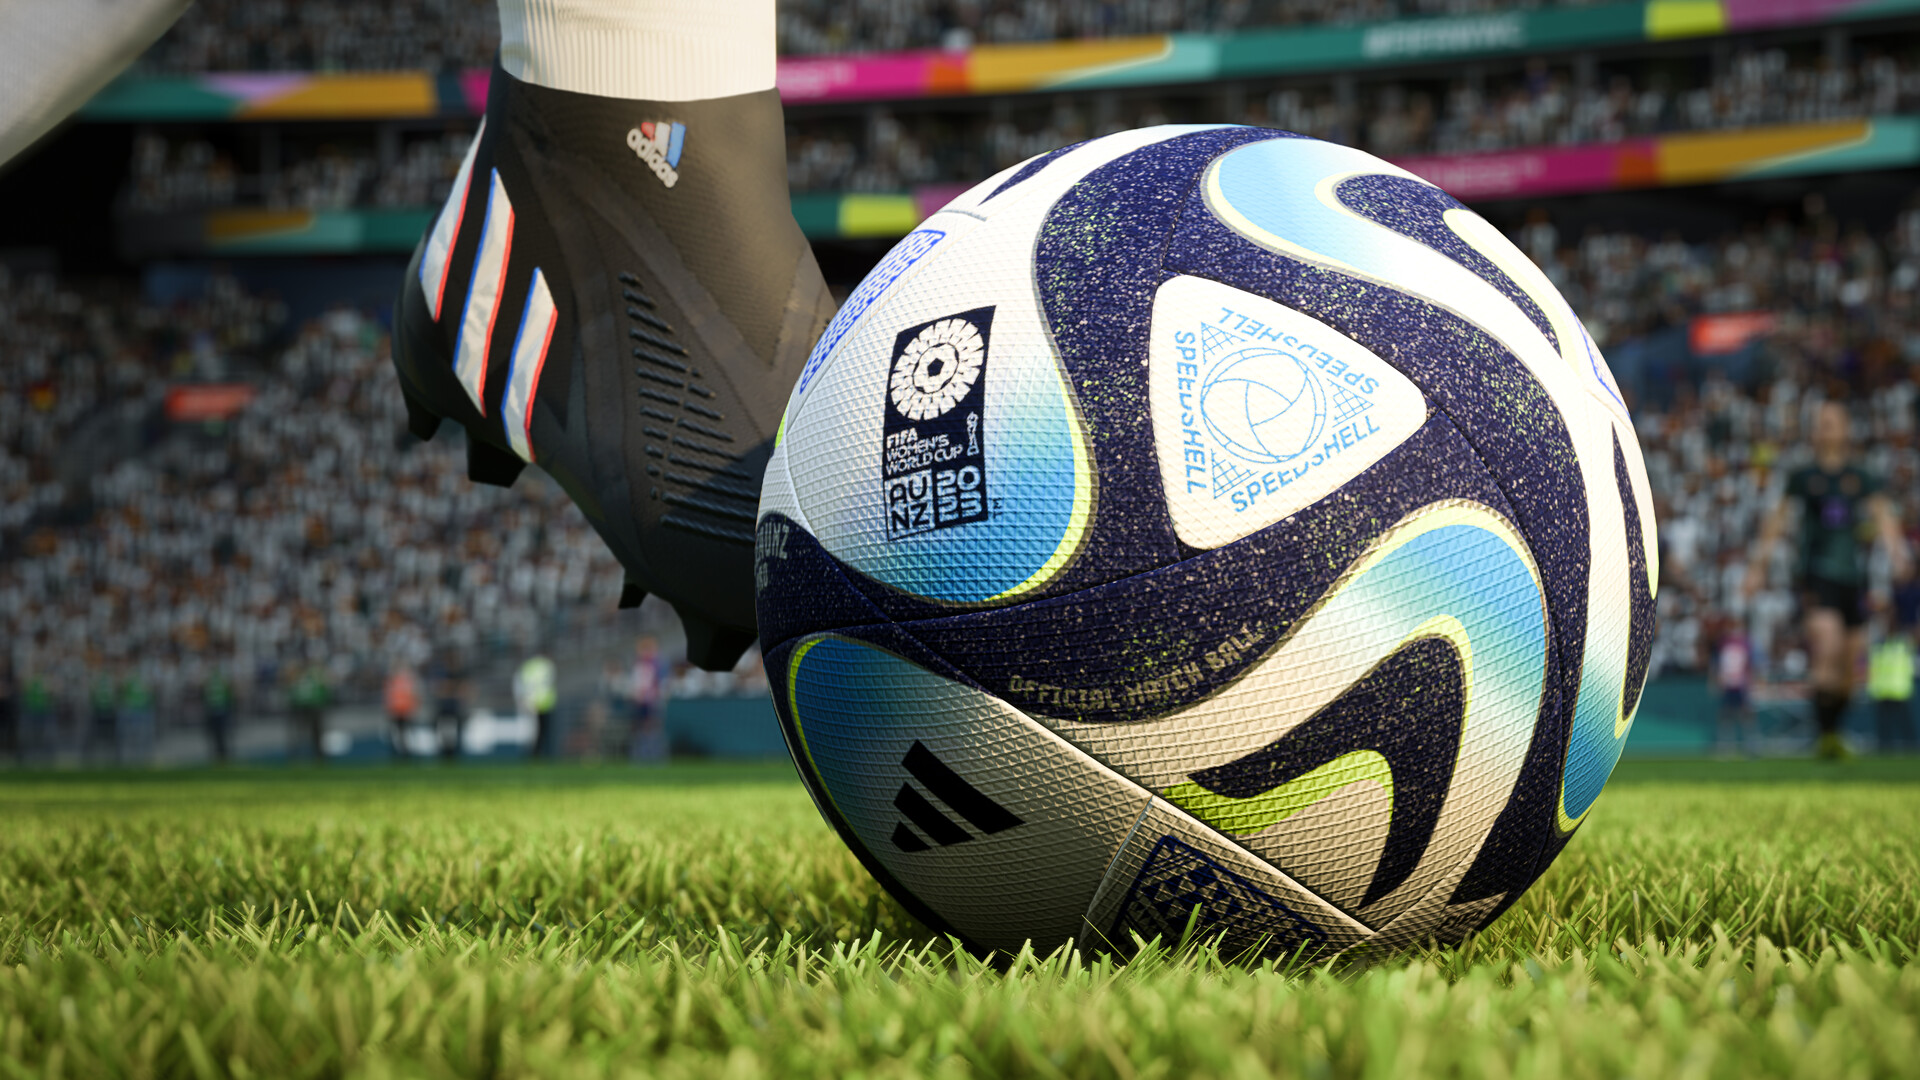 EA SPORTS FIFA 23 - Download for PC Free